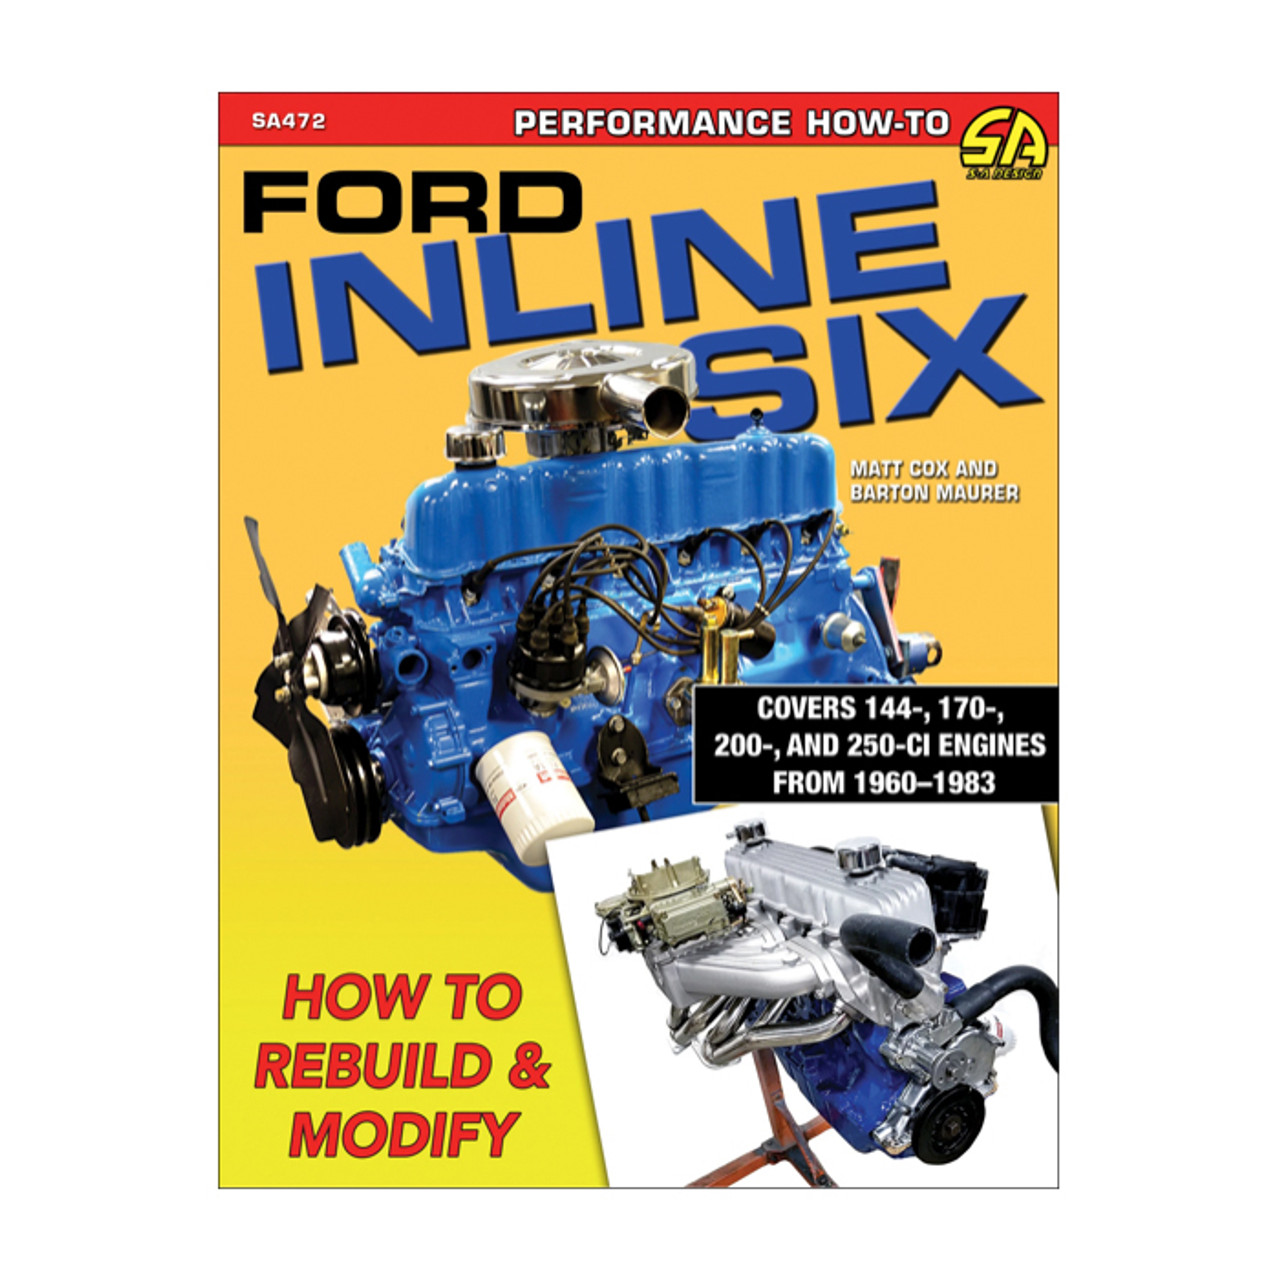 Ford Inline Six How To Rebuild and Modify